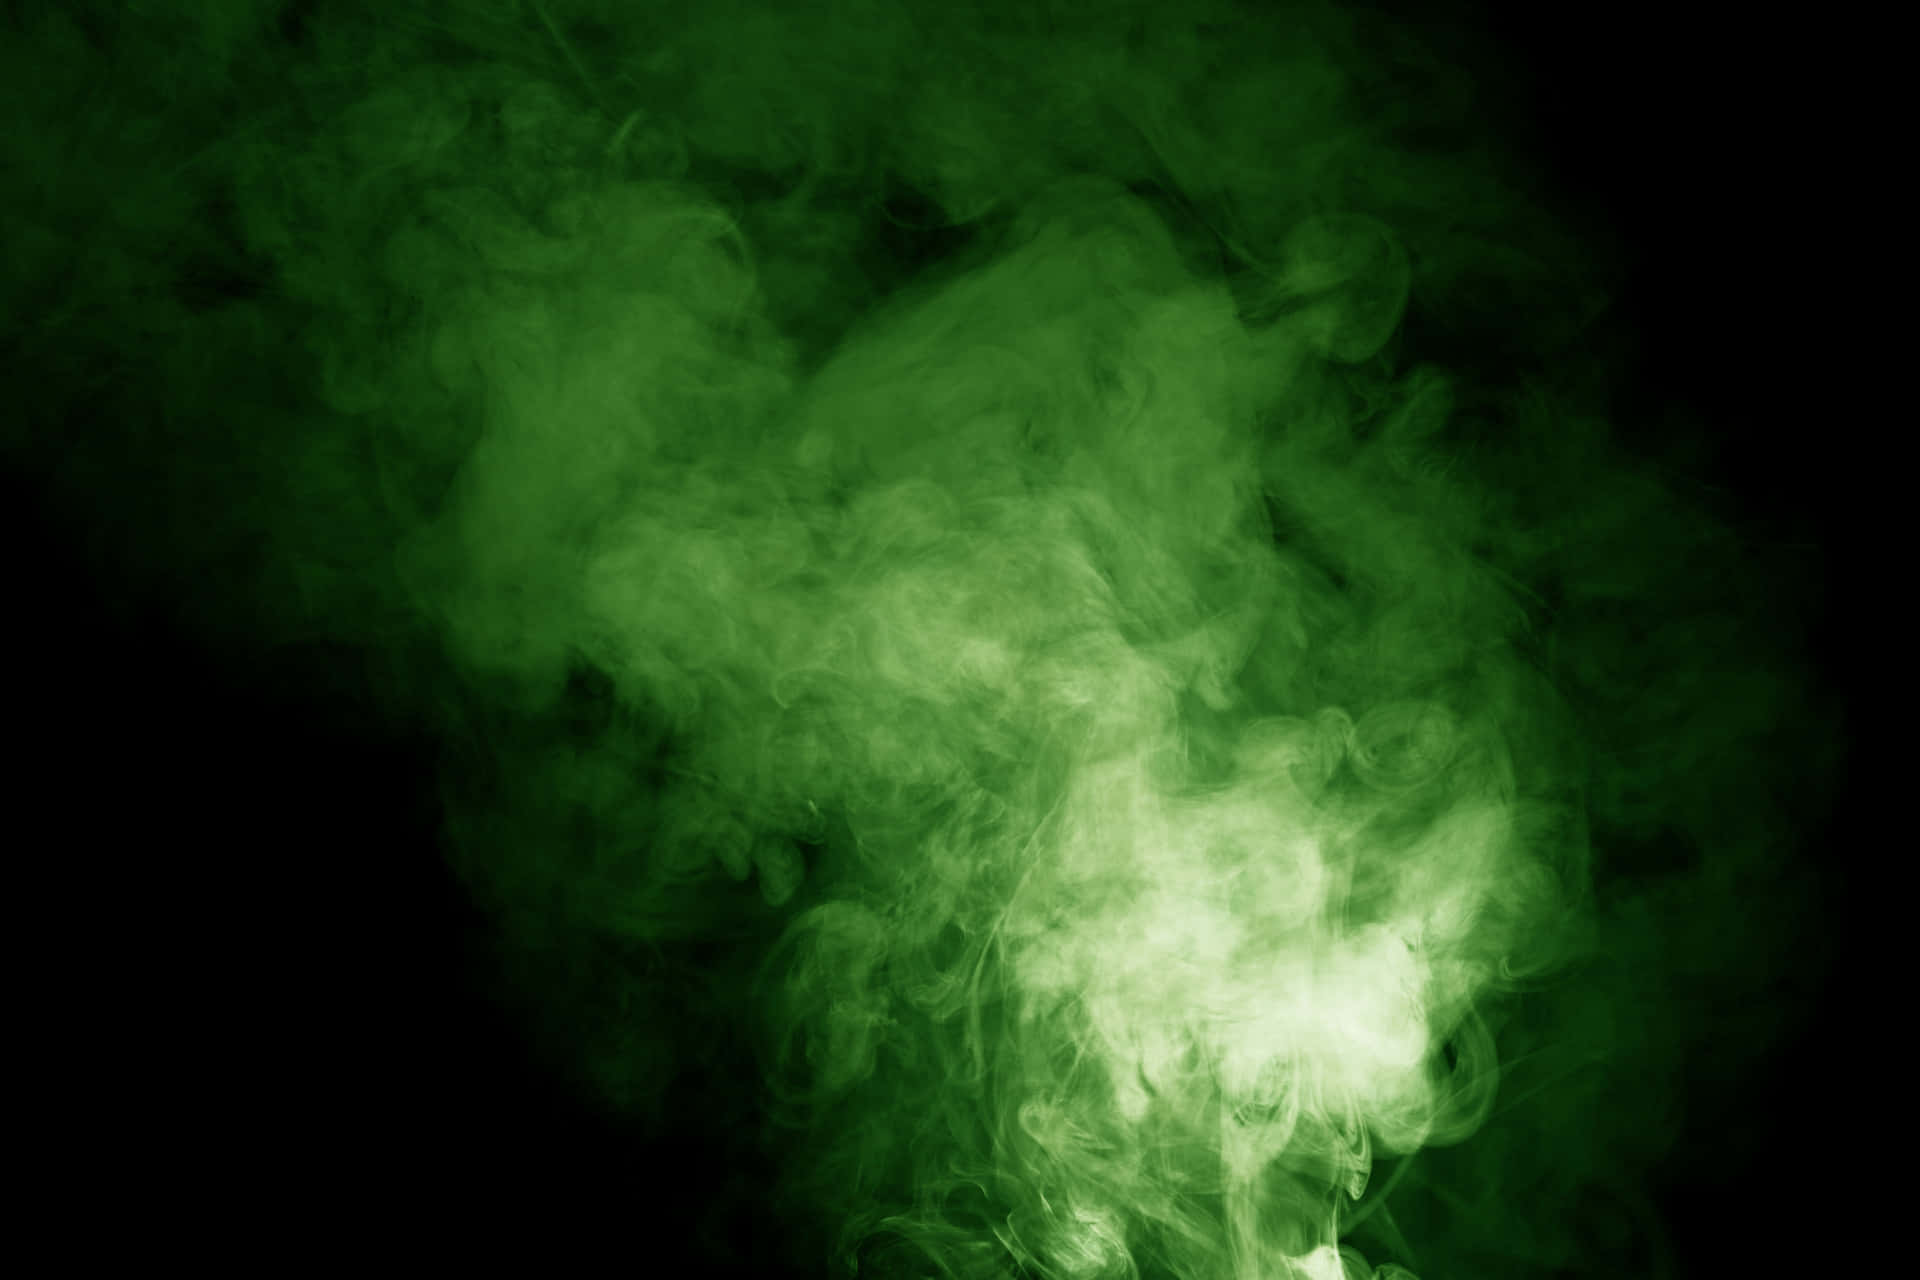 Enjoy the flavor of Green Smoke and its unique, satisfying experience.